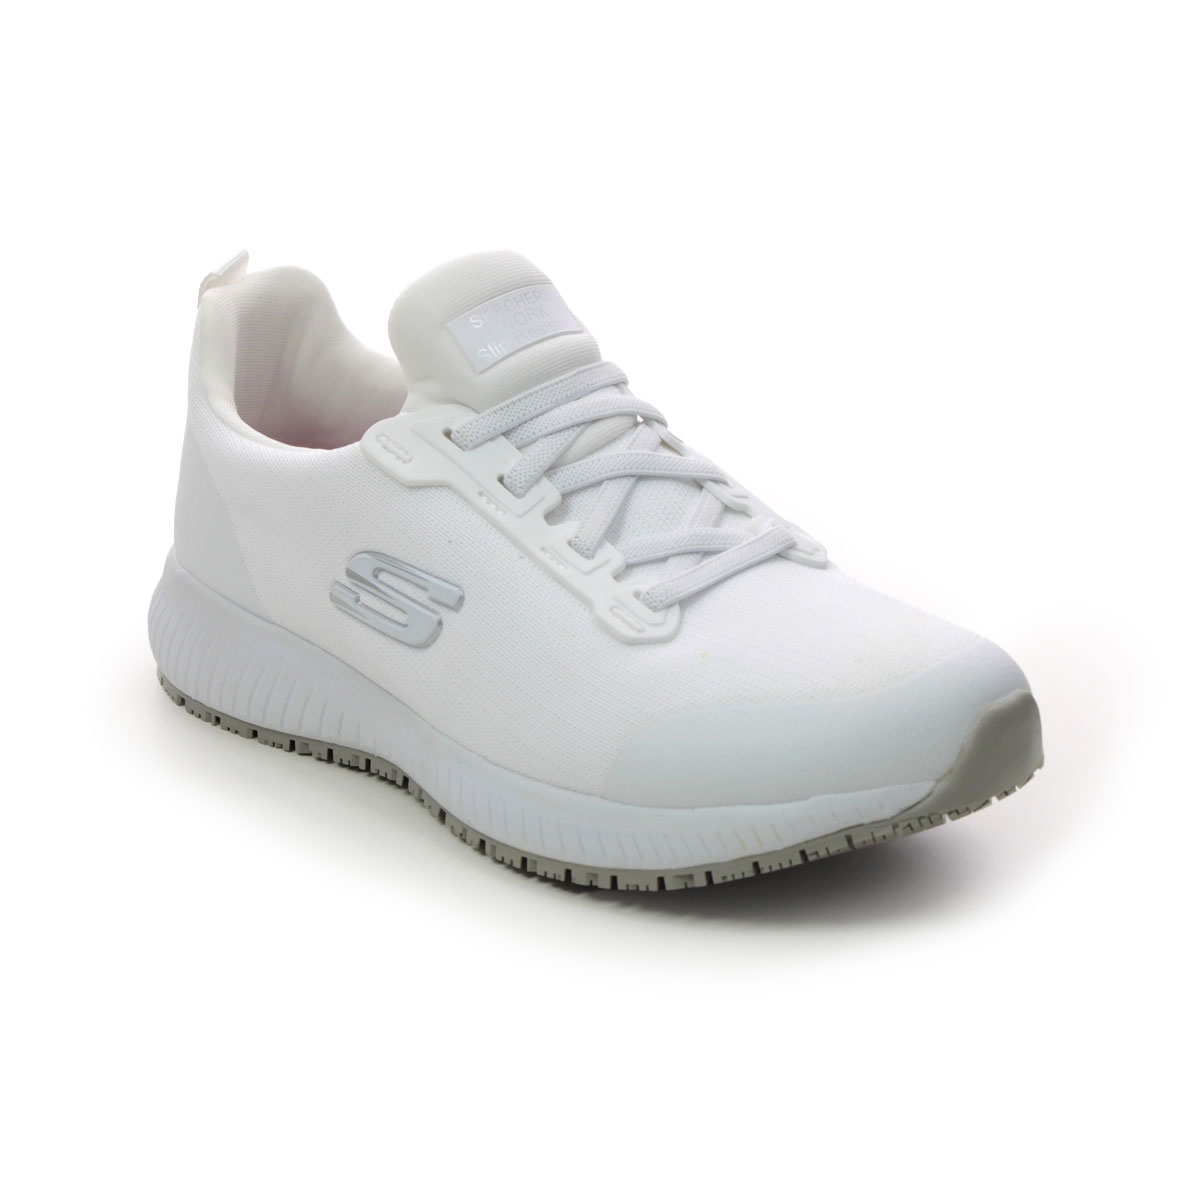 Skechers Work Squad Slip Resistant White Womens Trainers 77222Ec In Size 5 In Plain White